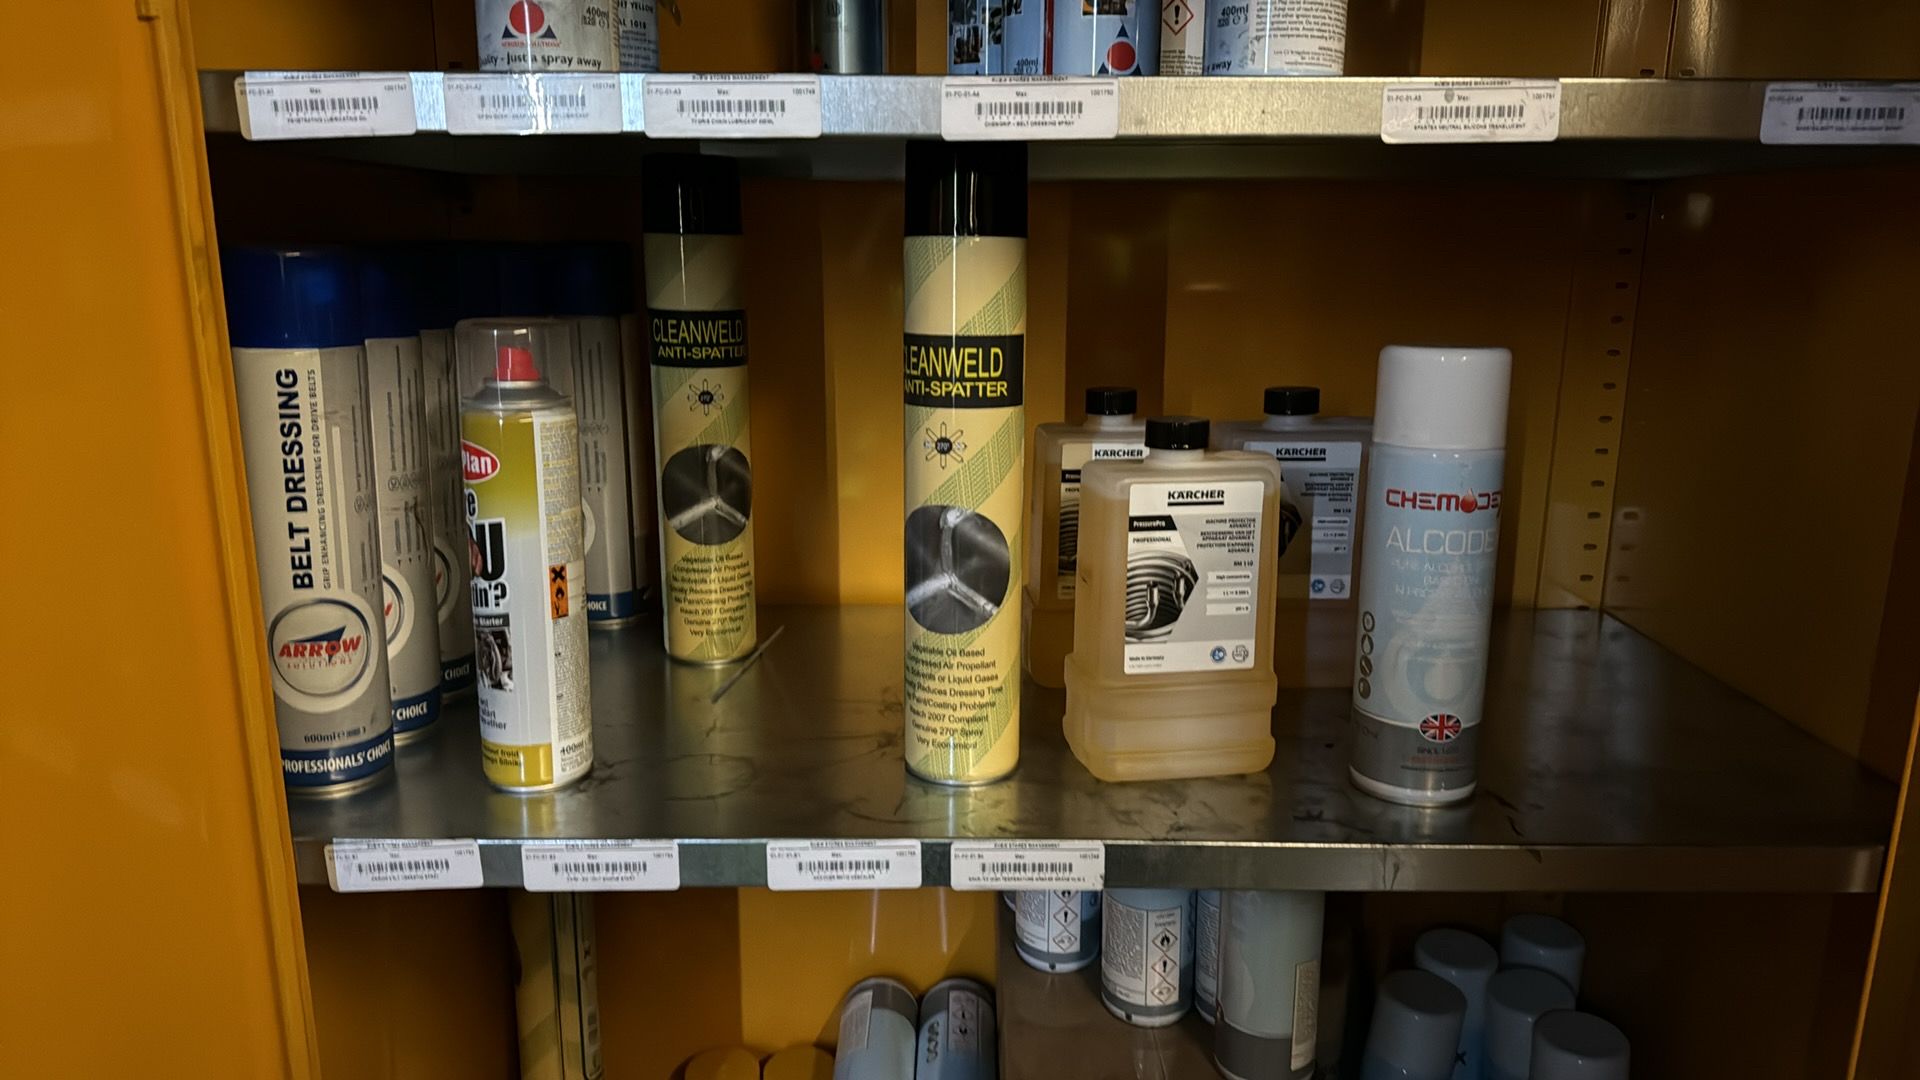 Cabinet & Contents Industrial Cleaning Products, Lubricants & Chemicals - Image 3 of 6